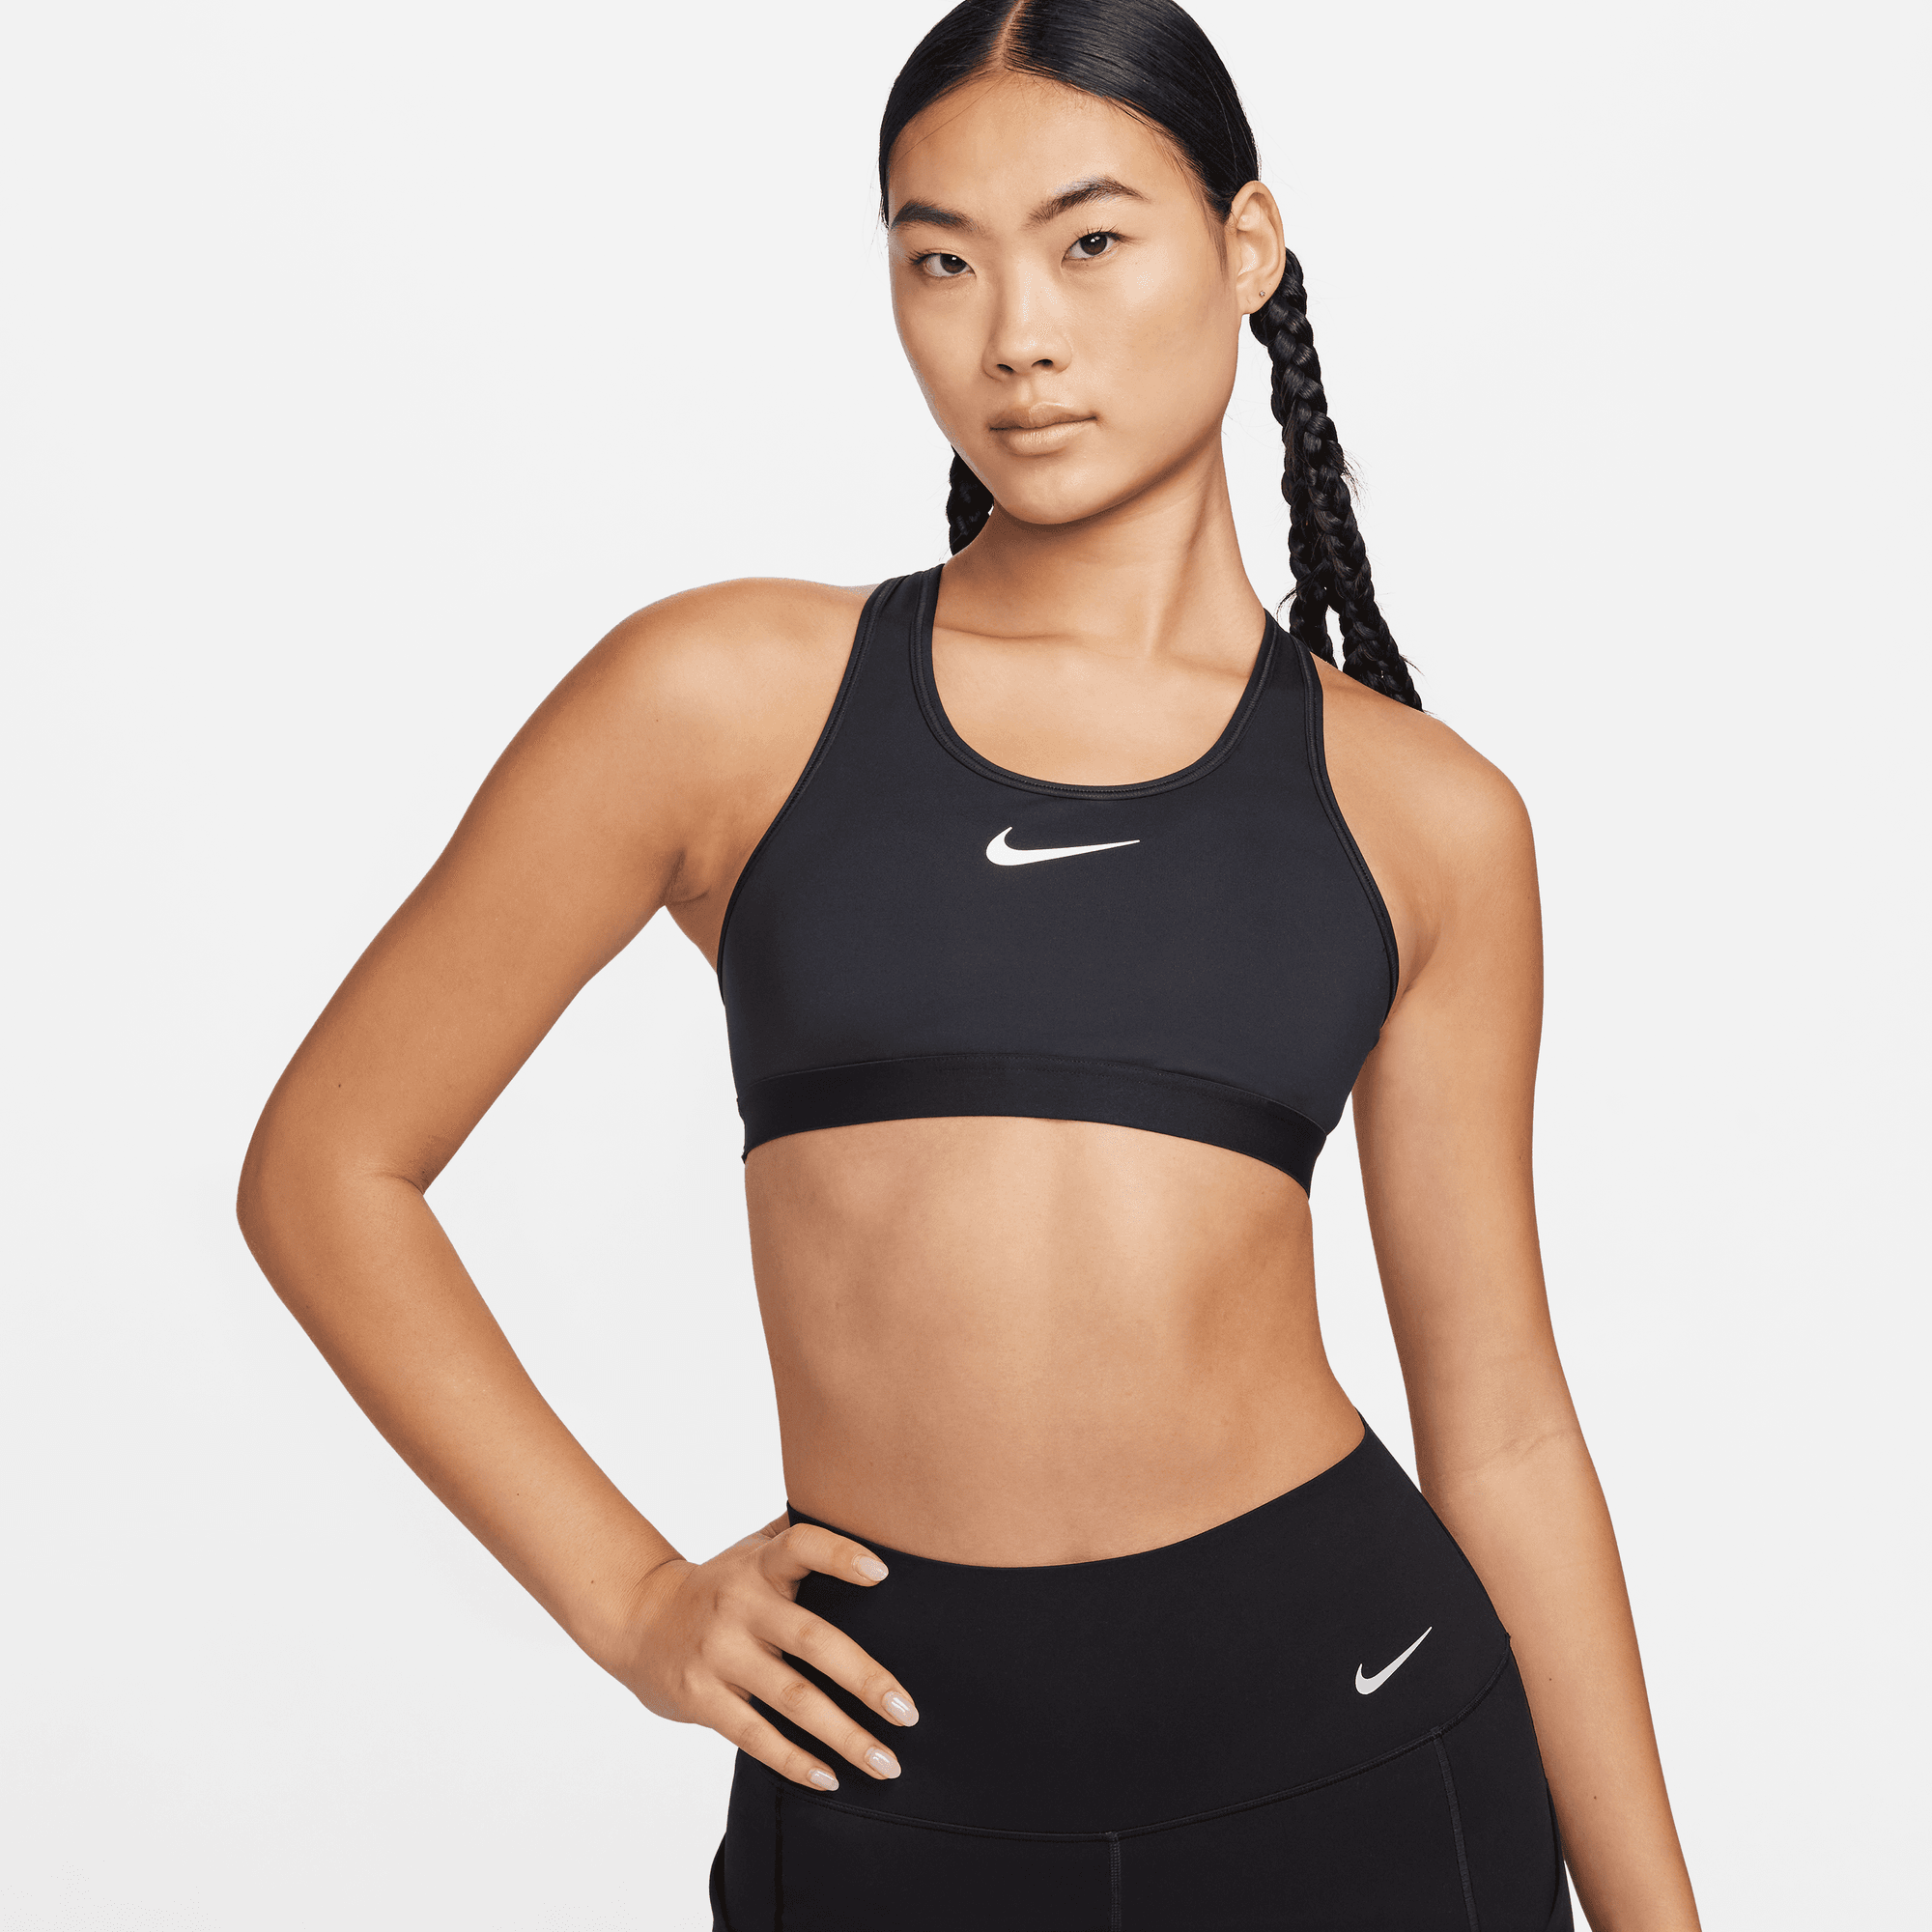 NIKE SWOOSH HIGH SUPPORT WOMEN'S NON-PADDED ADJUSTABLE SPORTS BRA  BLACK/IRON GREY/WHITE – Park Outlet Ph